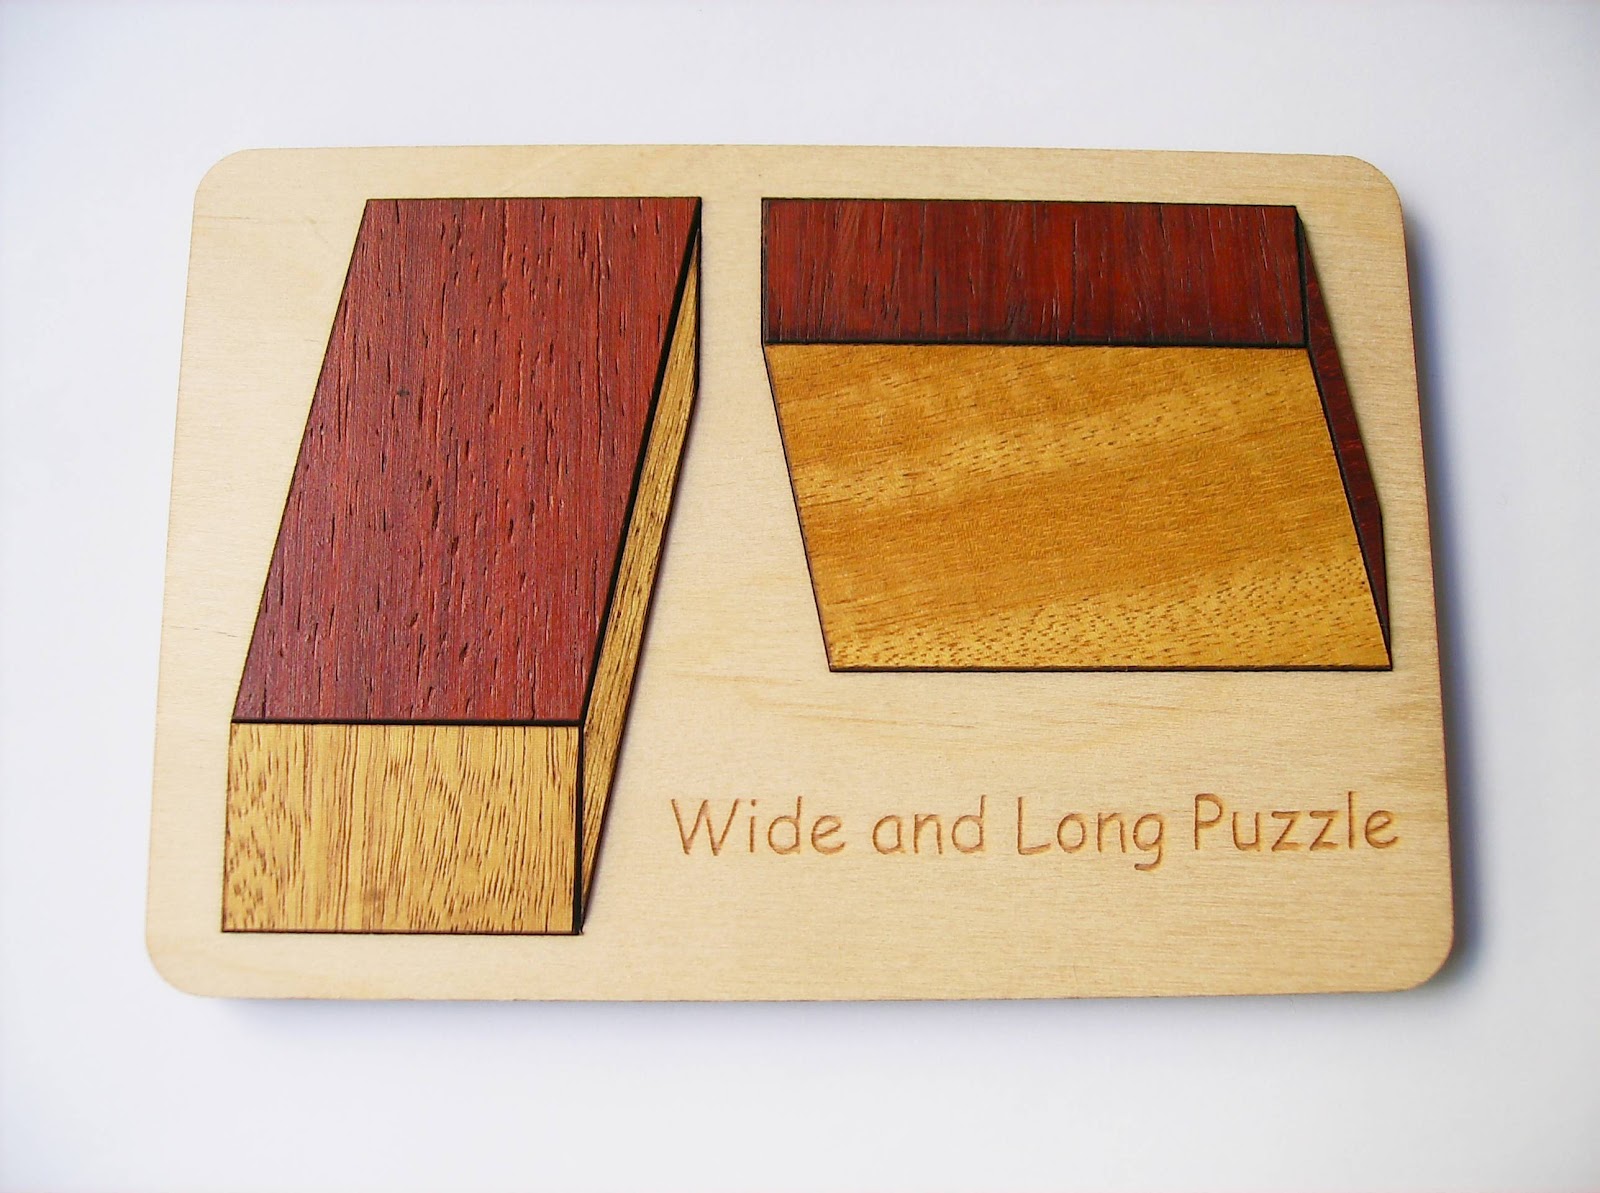 Gabriel Fernandes' Puzzle Collection: Wide and Long Puzzle